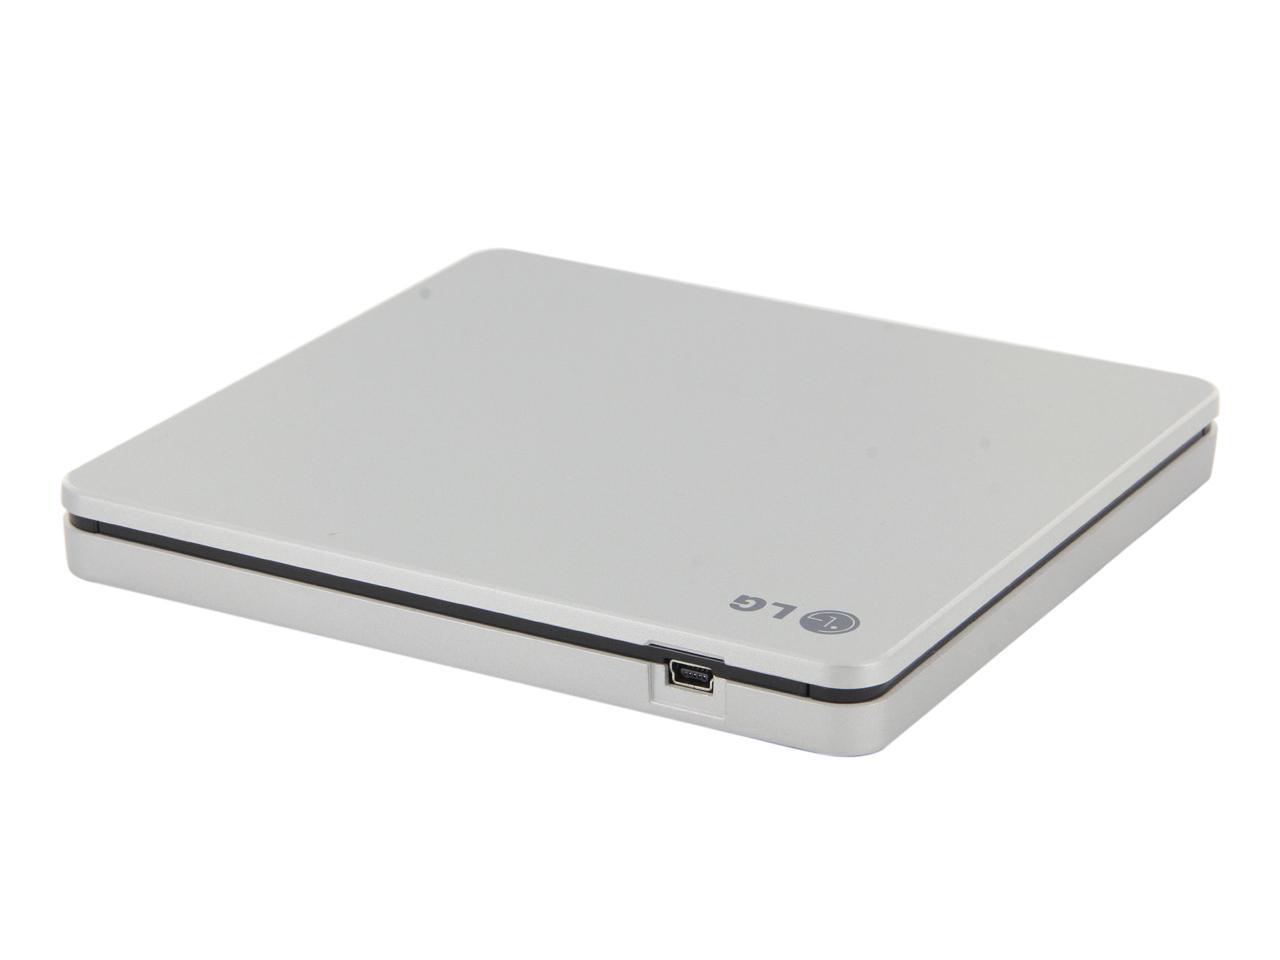 does lg slim portable dvd writer need driver for mac